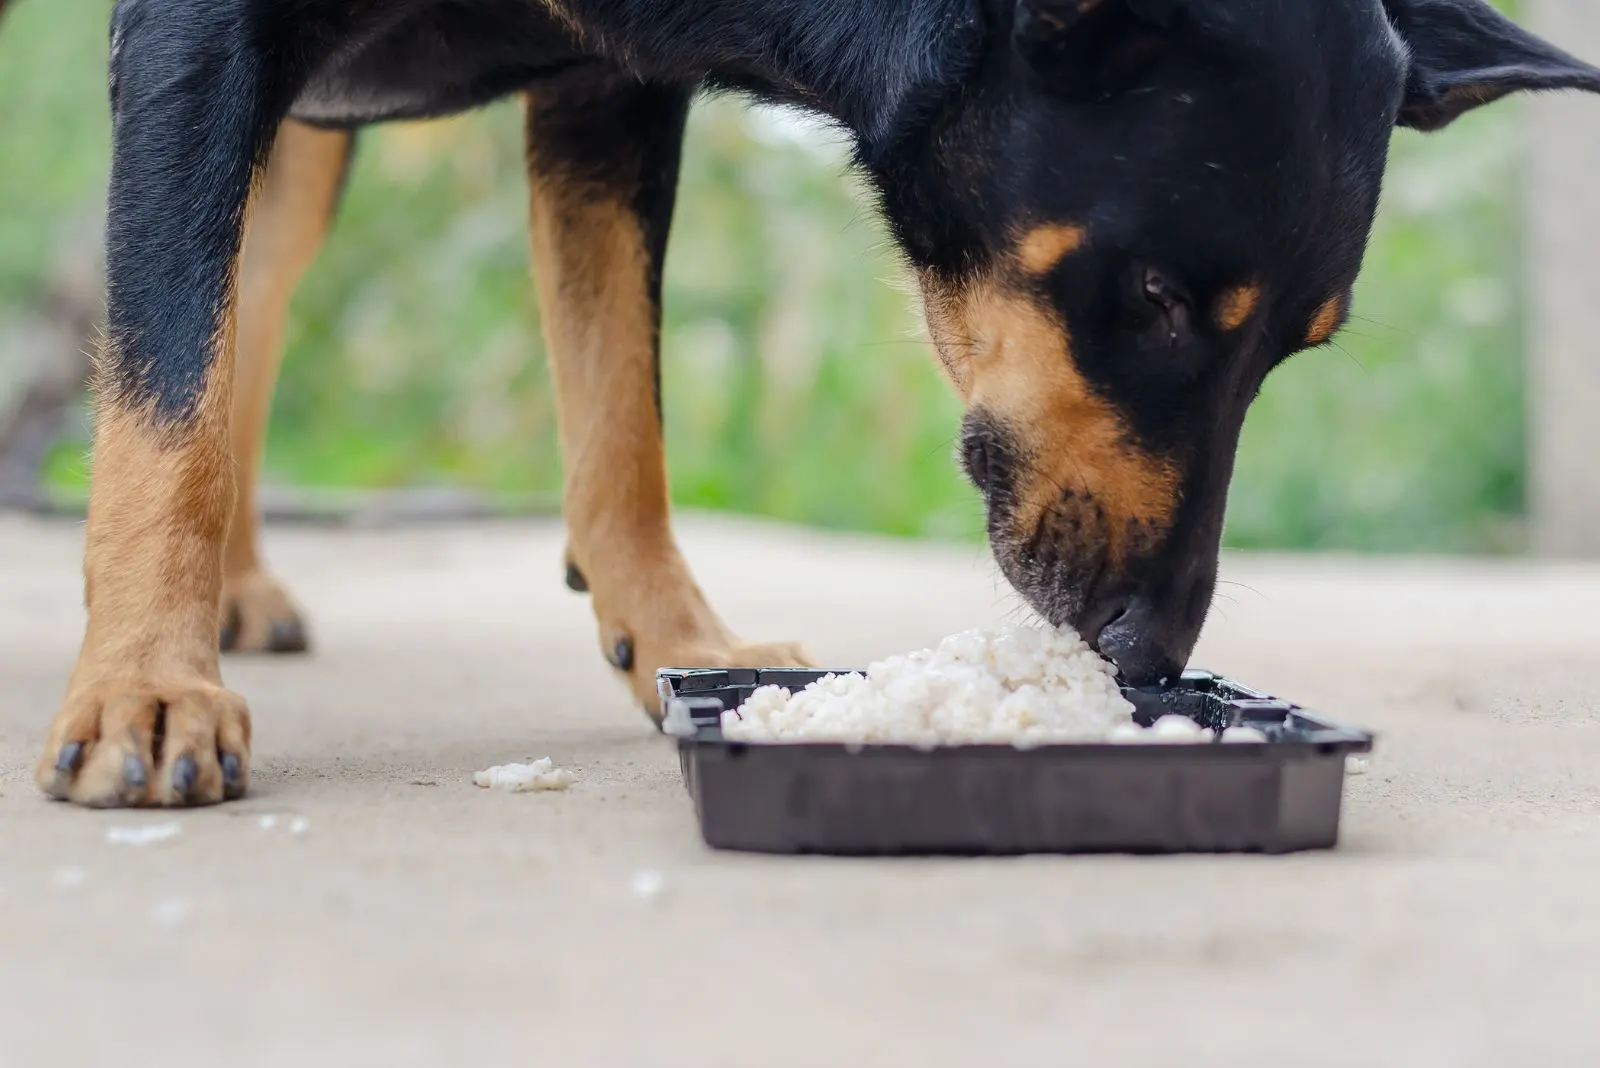 Doberman Pinscher dog eating white rice from a black bowl